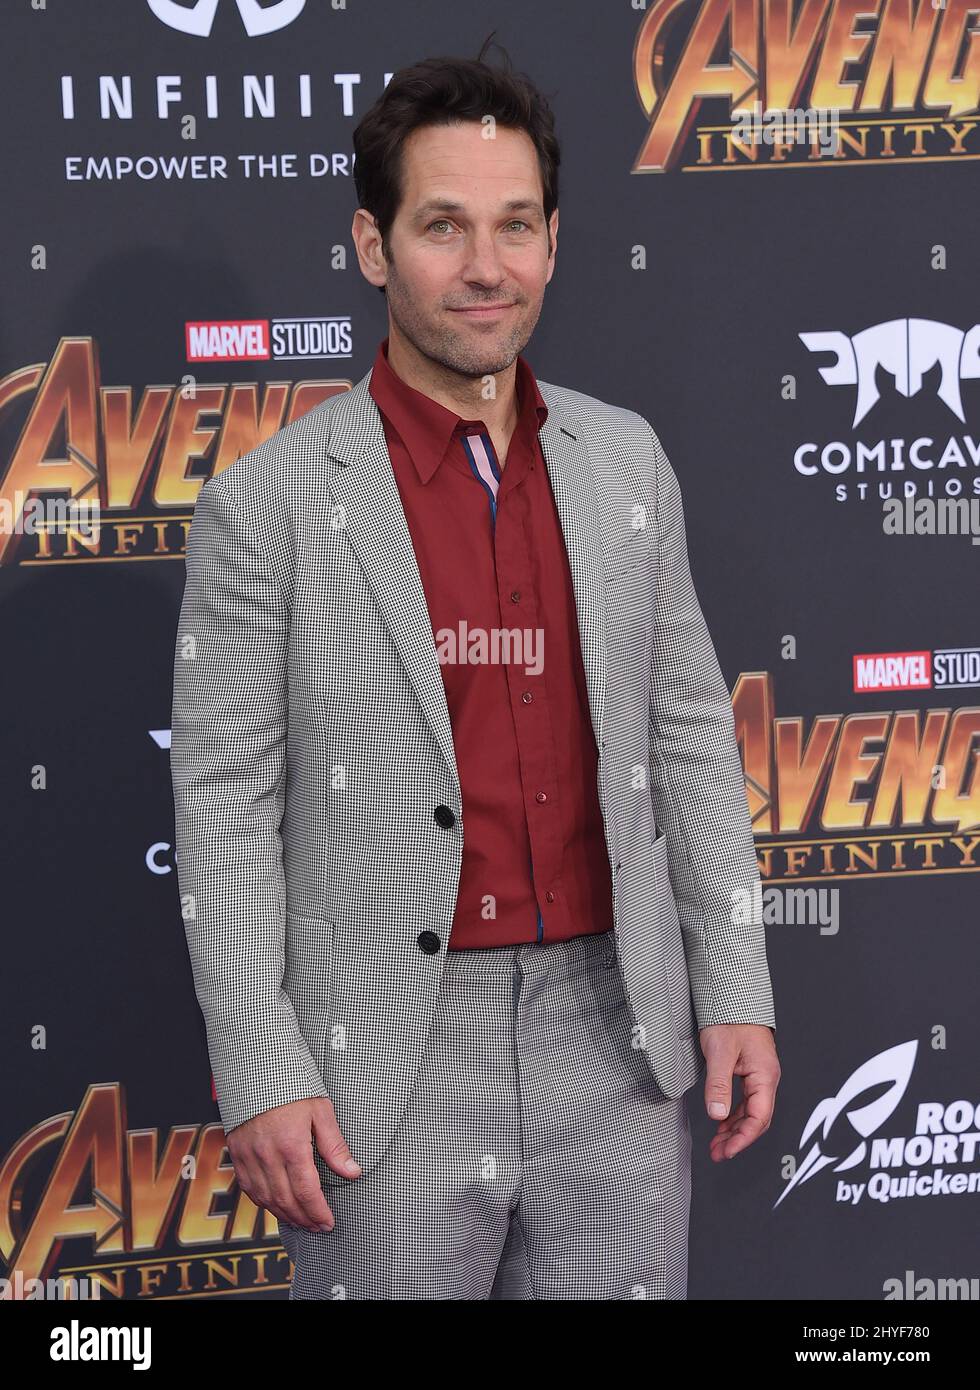 Paul Rudd attending the world premiere of Avengers: Infinity War, held at the El Capitan Theatre in Hollywood, California Stock Photo